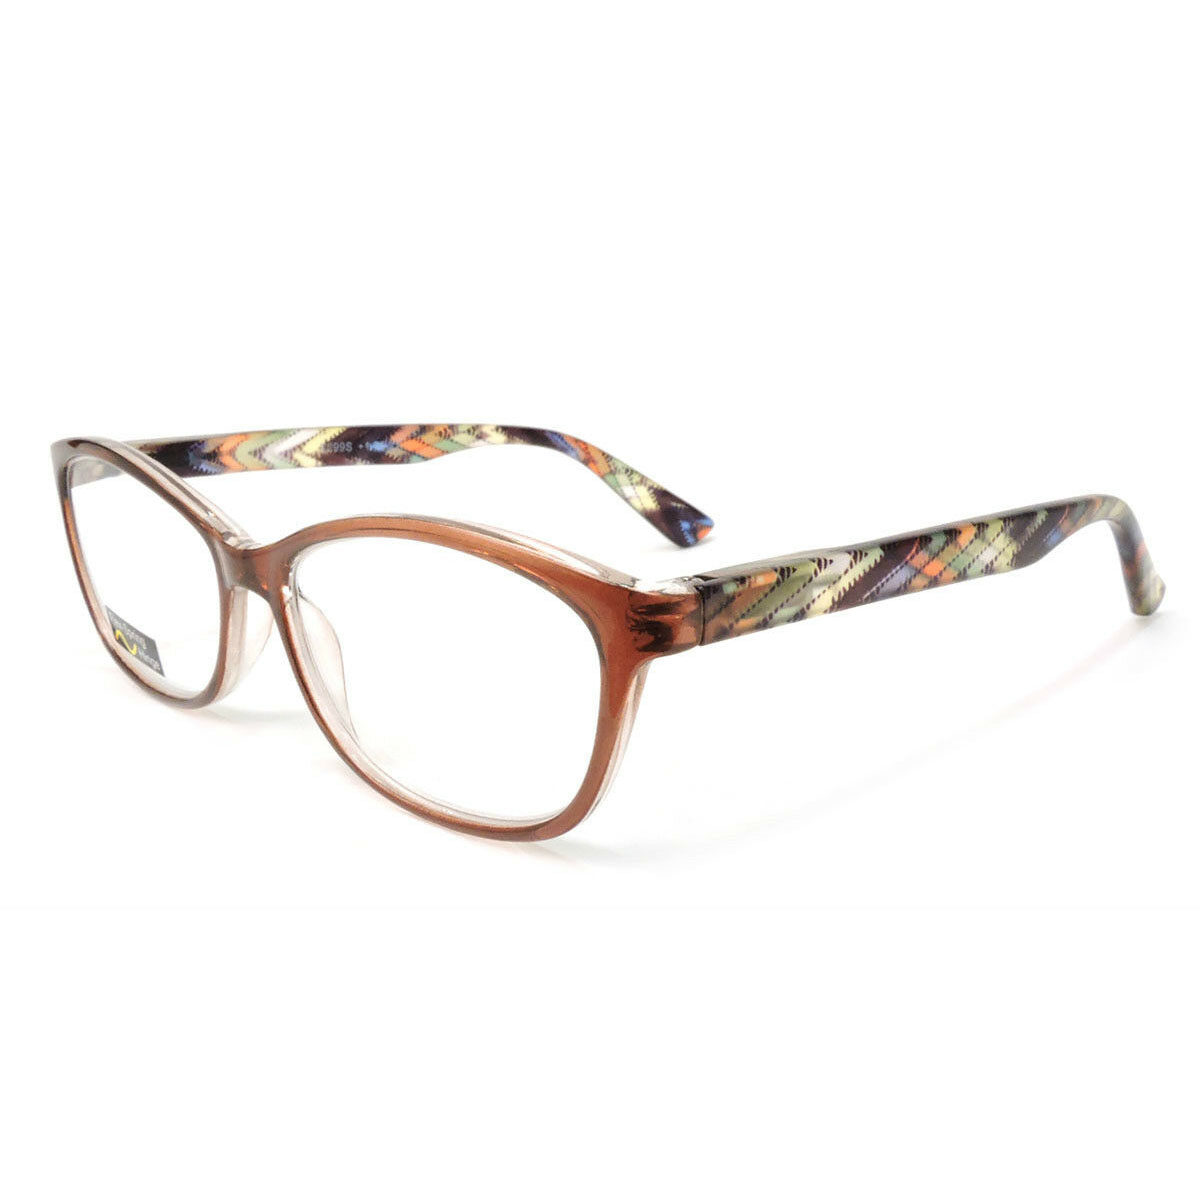 Classic Frame Reading Glasses Colorful Arms Retro Vintage Style - Brown, +2.25